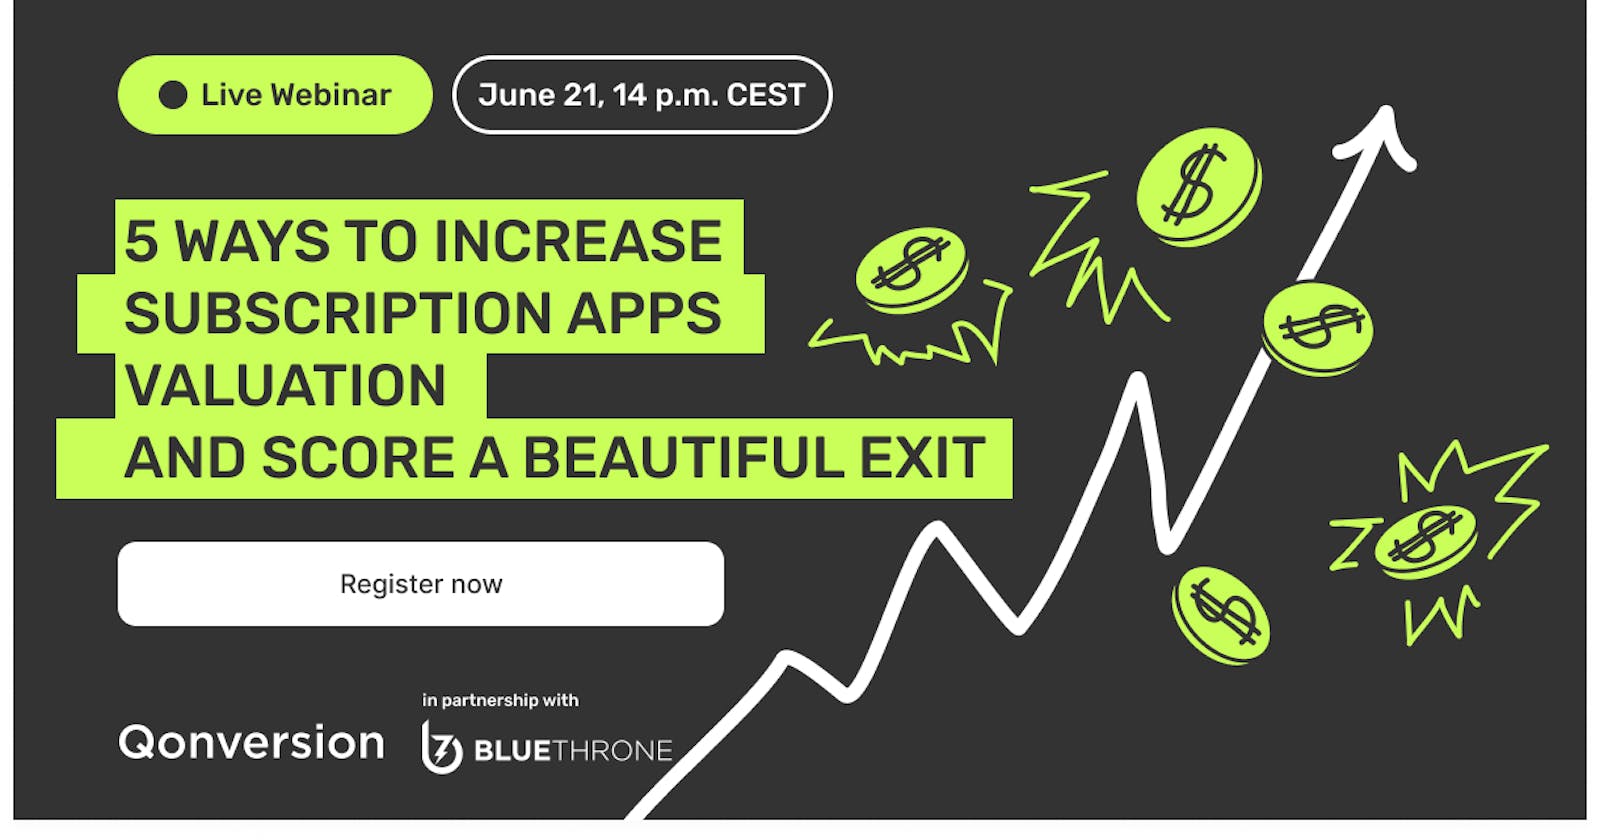 5 ways to increase app valuation and score a beautiful EXIT